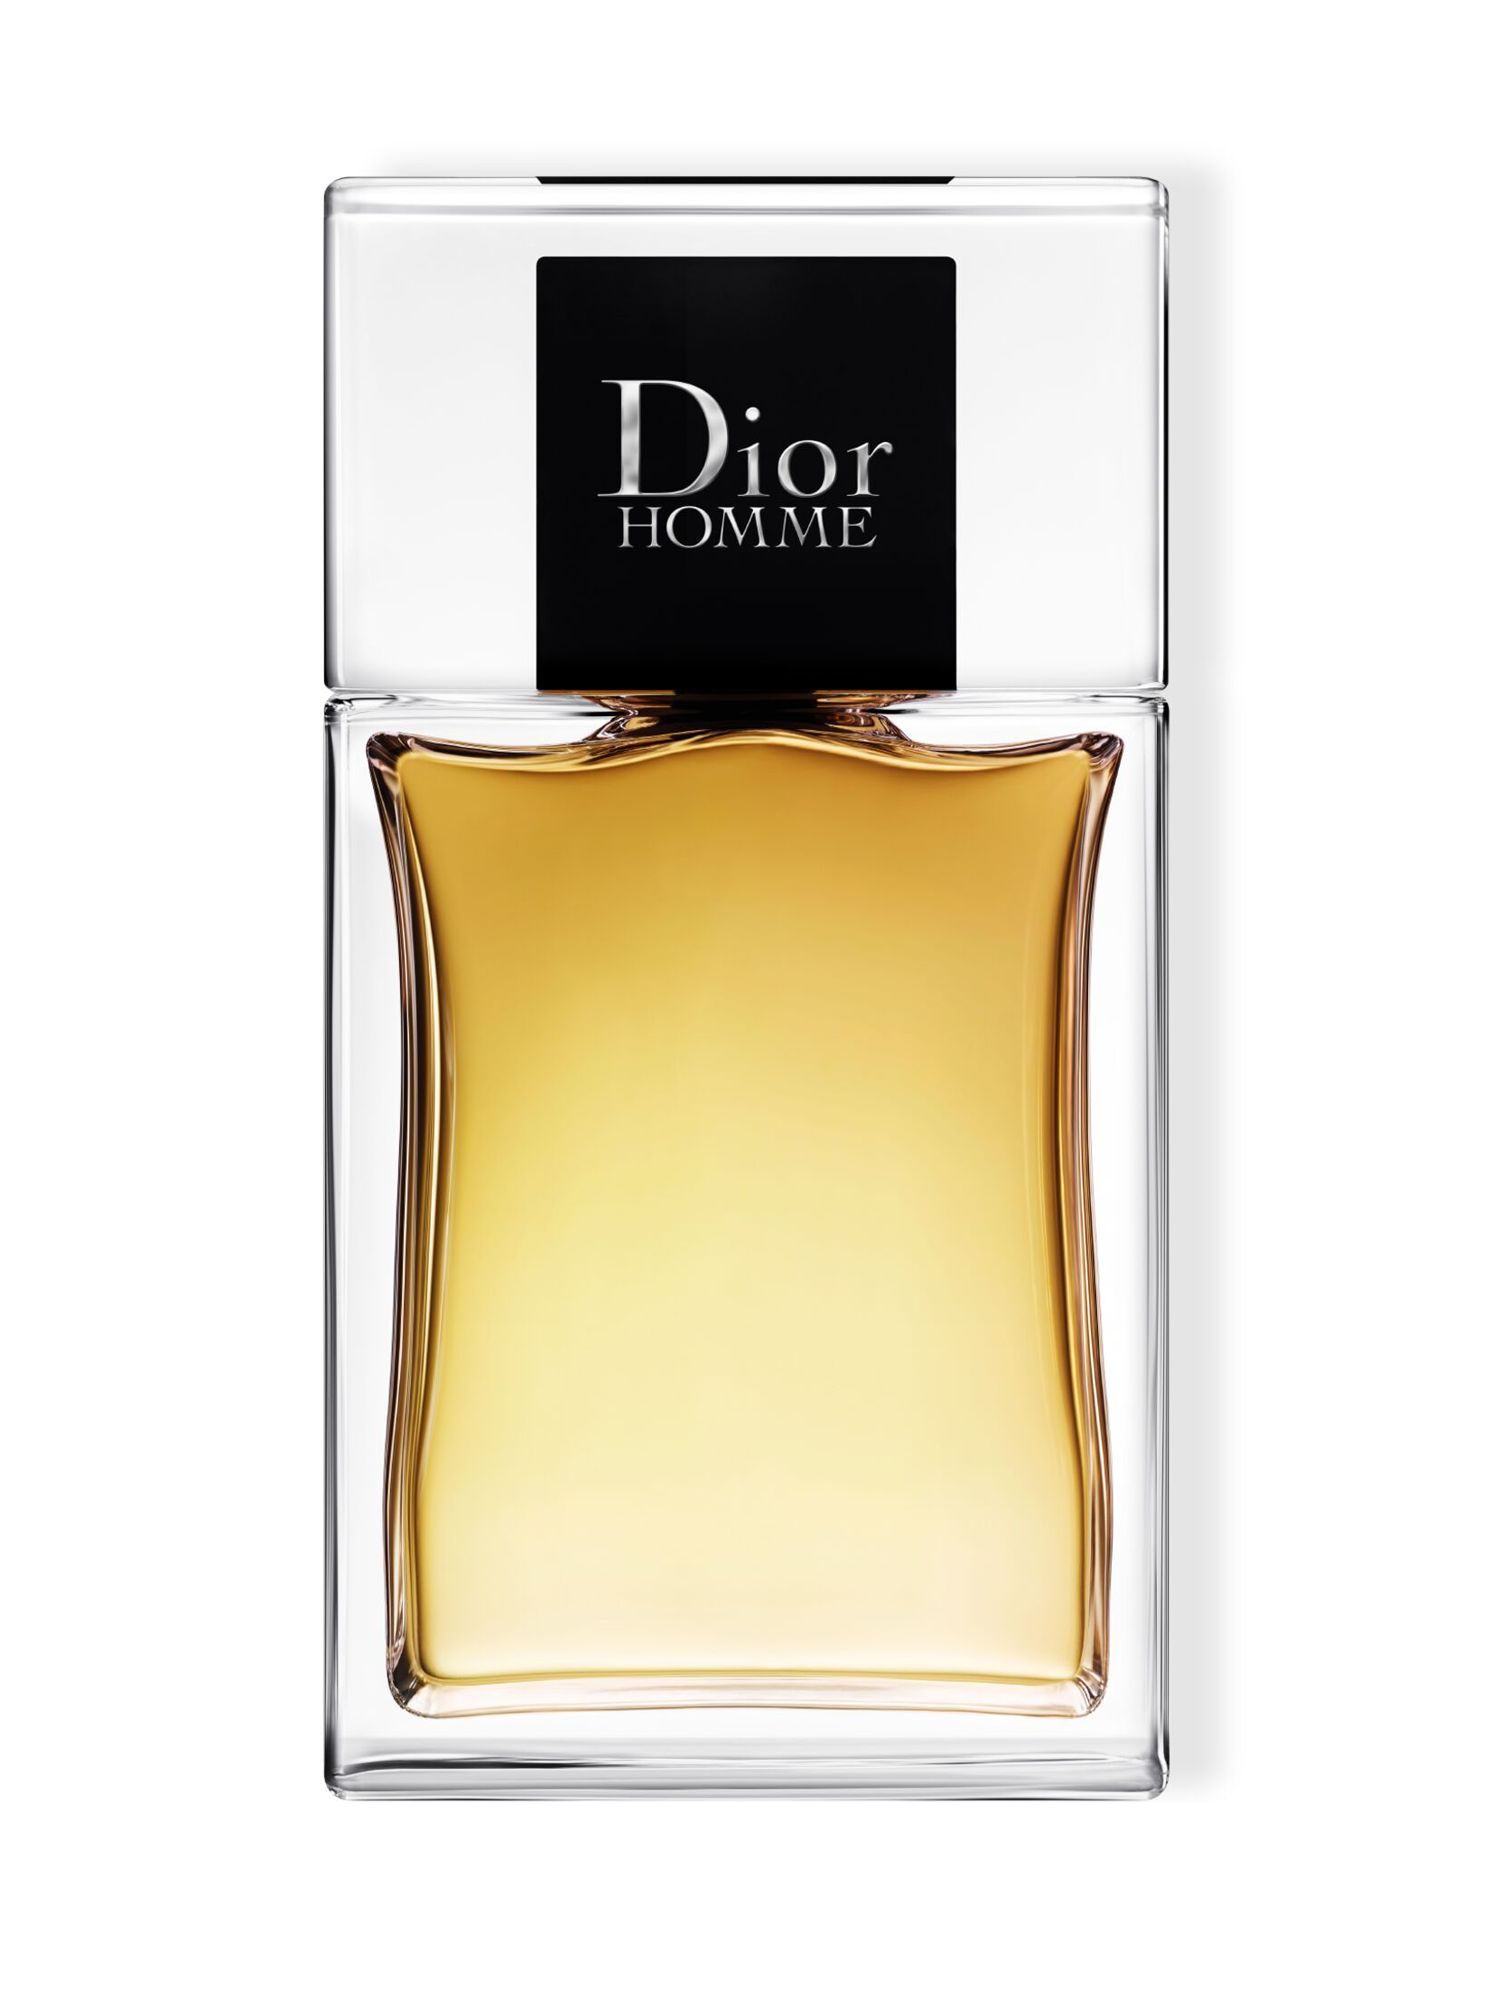 DIOR Homme Aftershave Lotion, 100ml at John Lewis & Partners